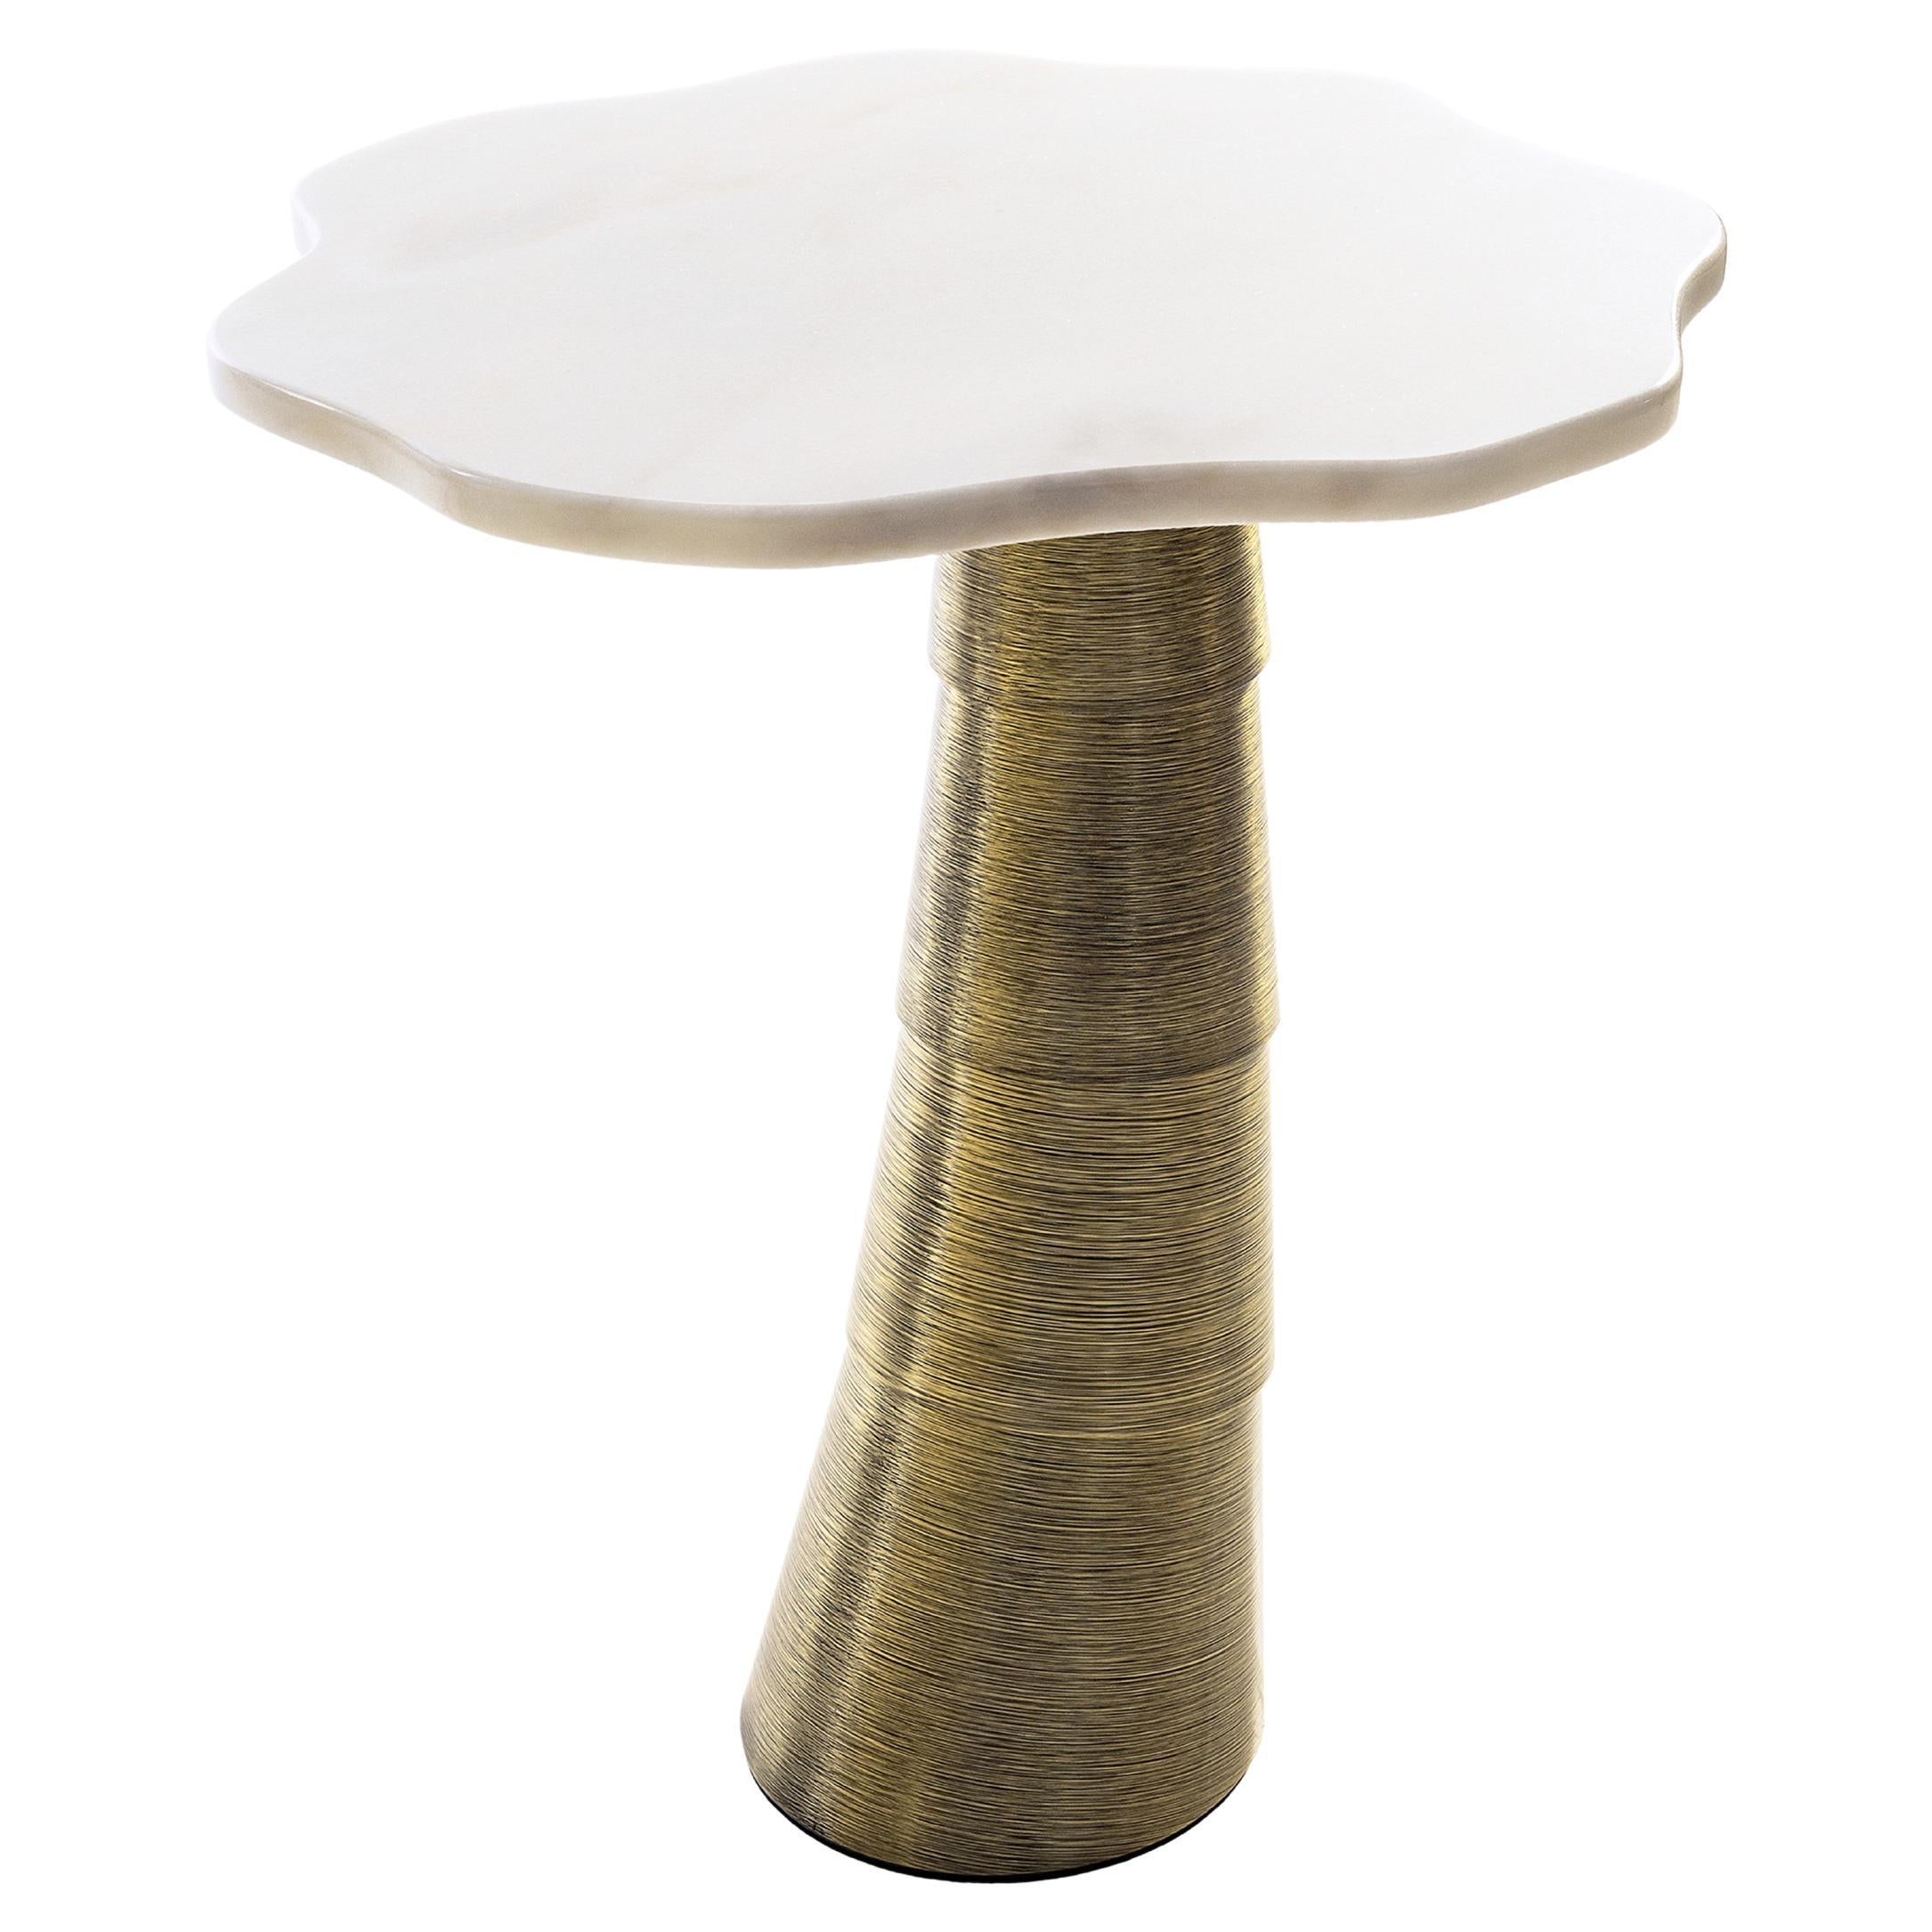 Palm Side Table, Estremoz and Brass, InsidherLand by Joana Santos Barbosa